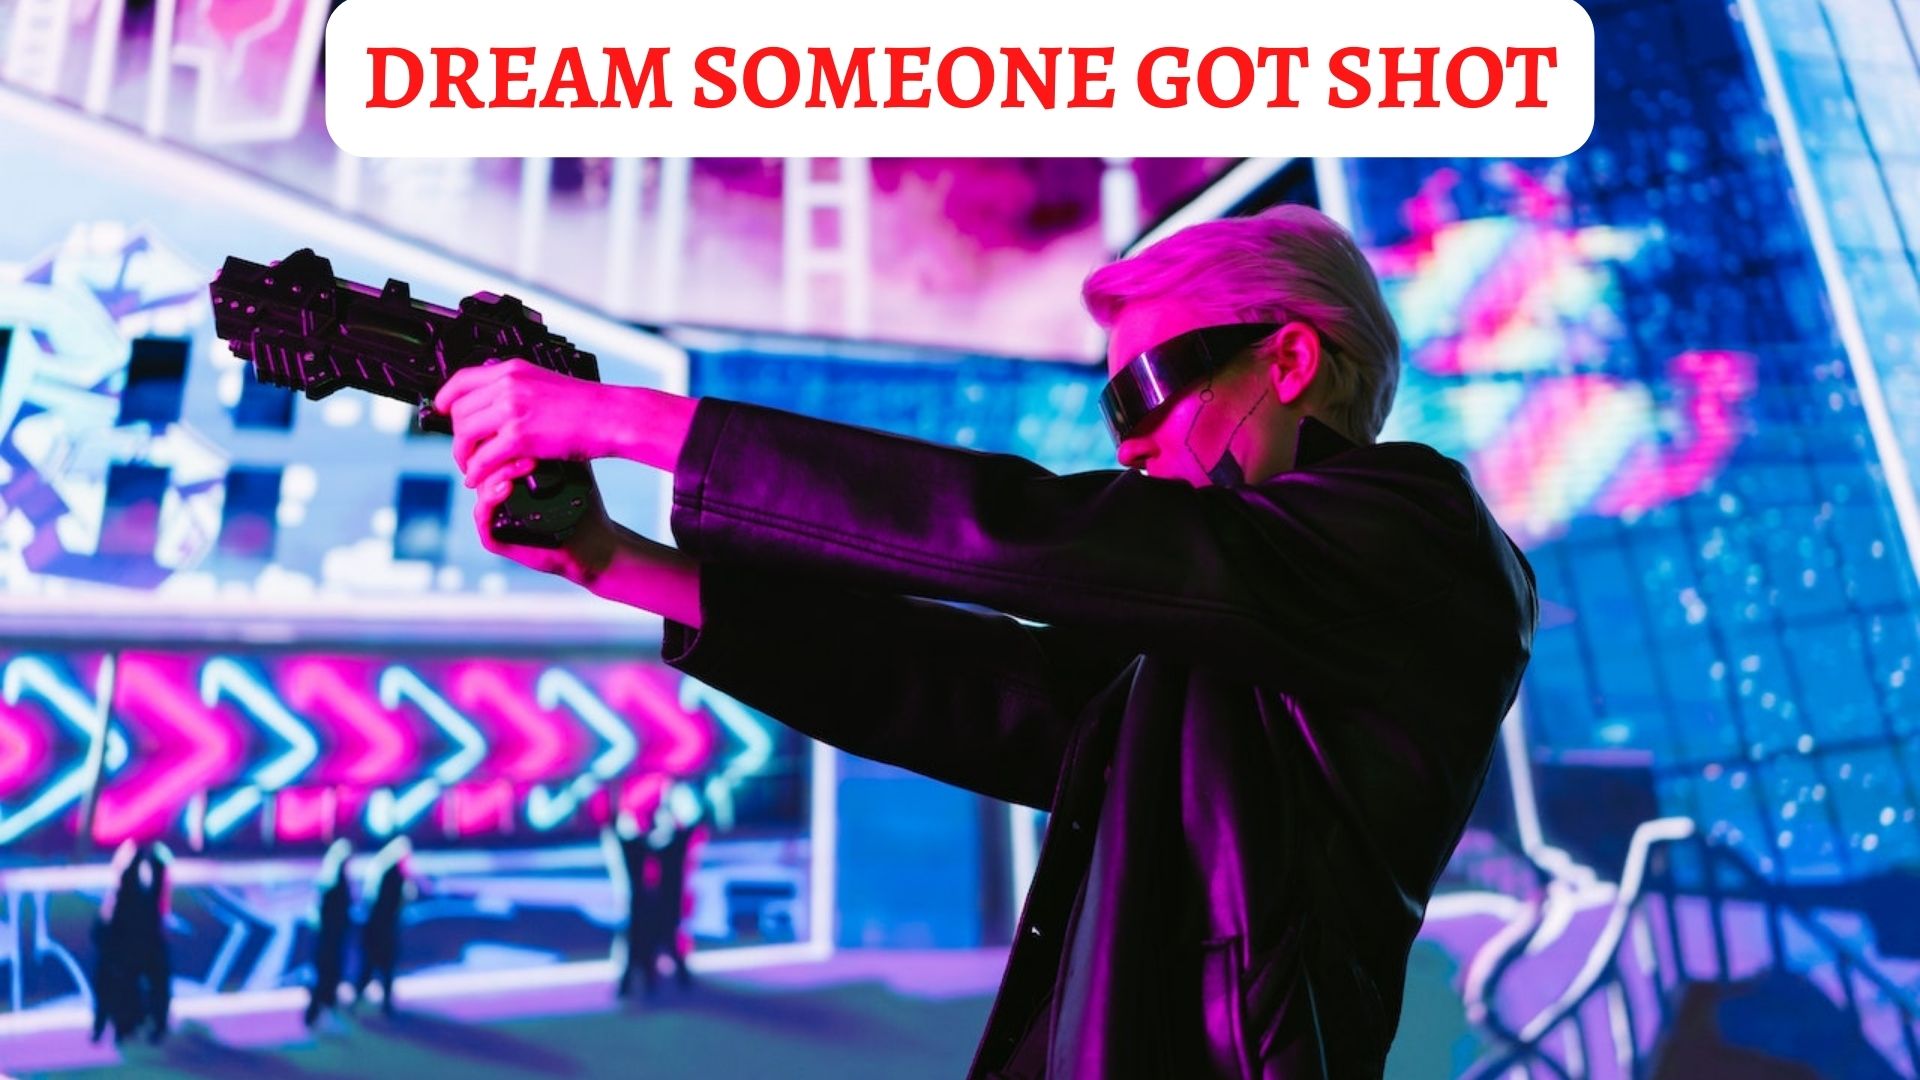 Dream Someone Got Shot - Meaning And Symbolism